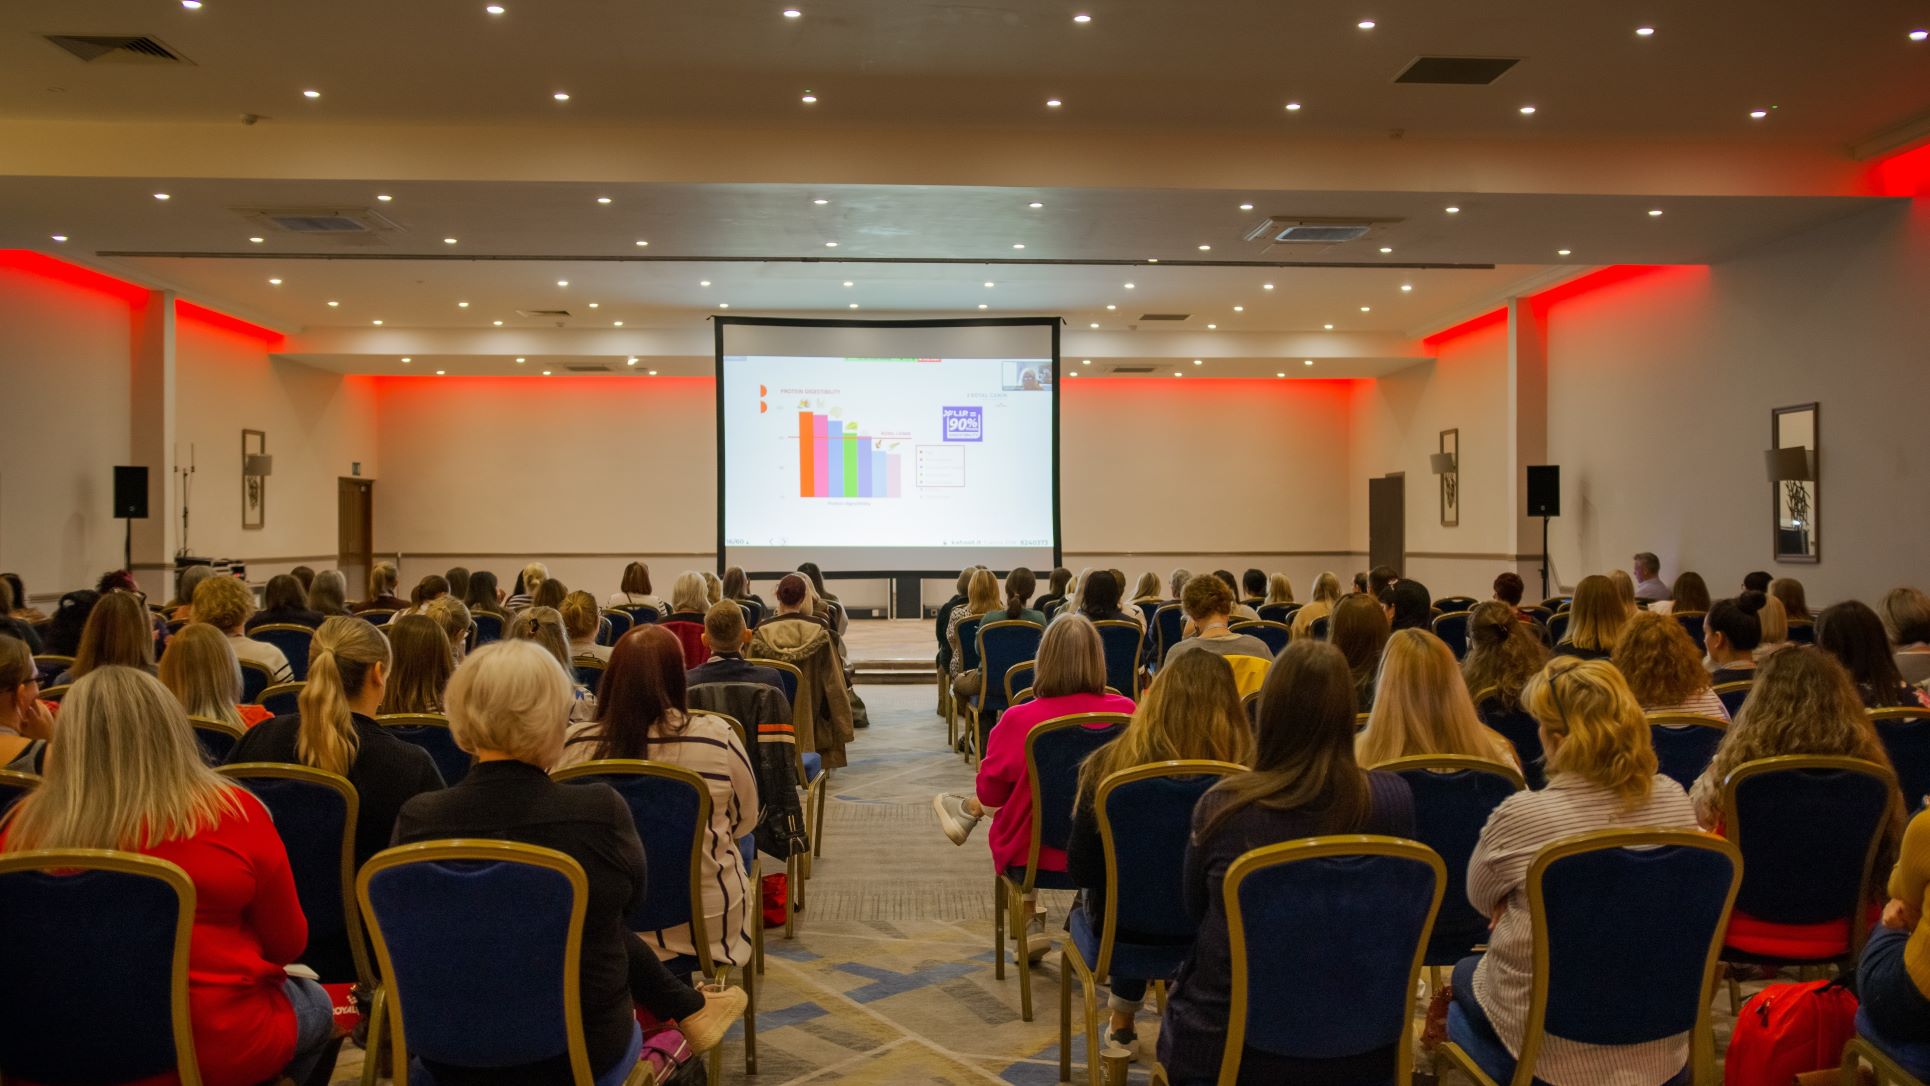 British Veterinary Receptionist Association launches 4th Annual Congress